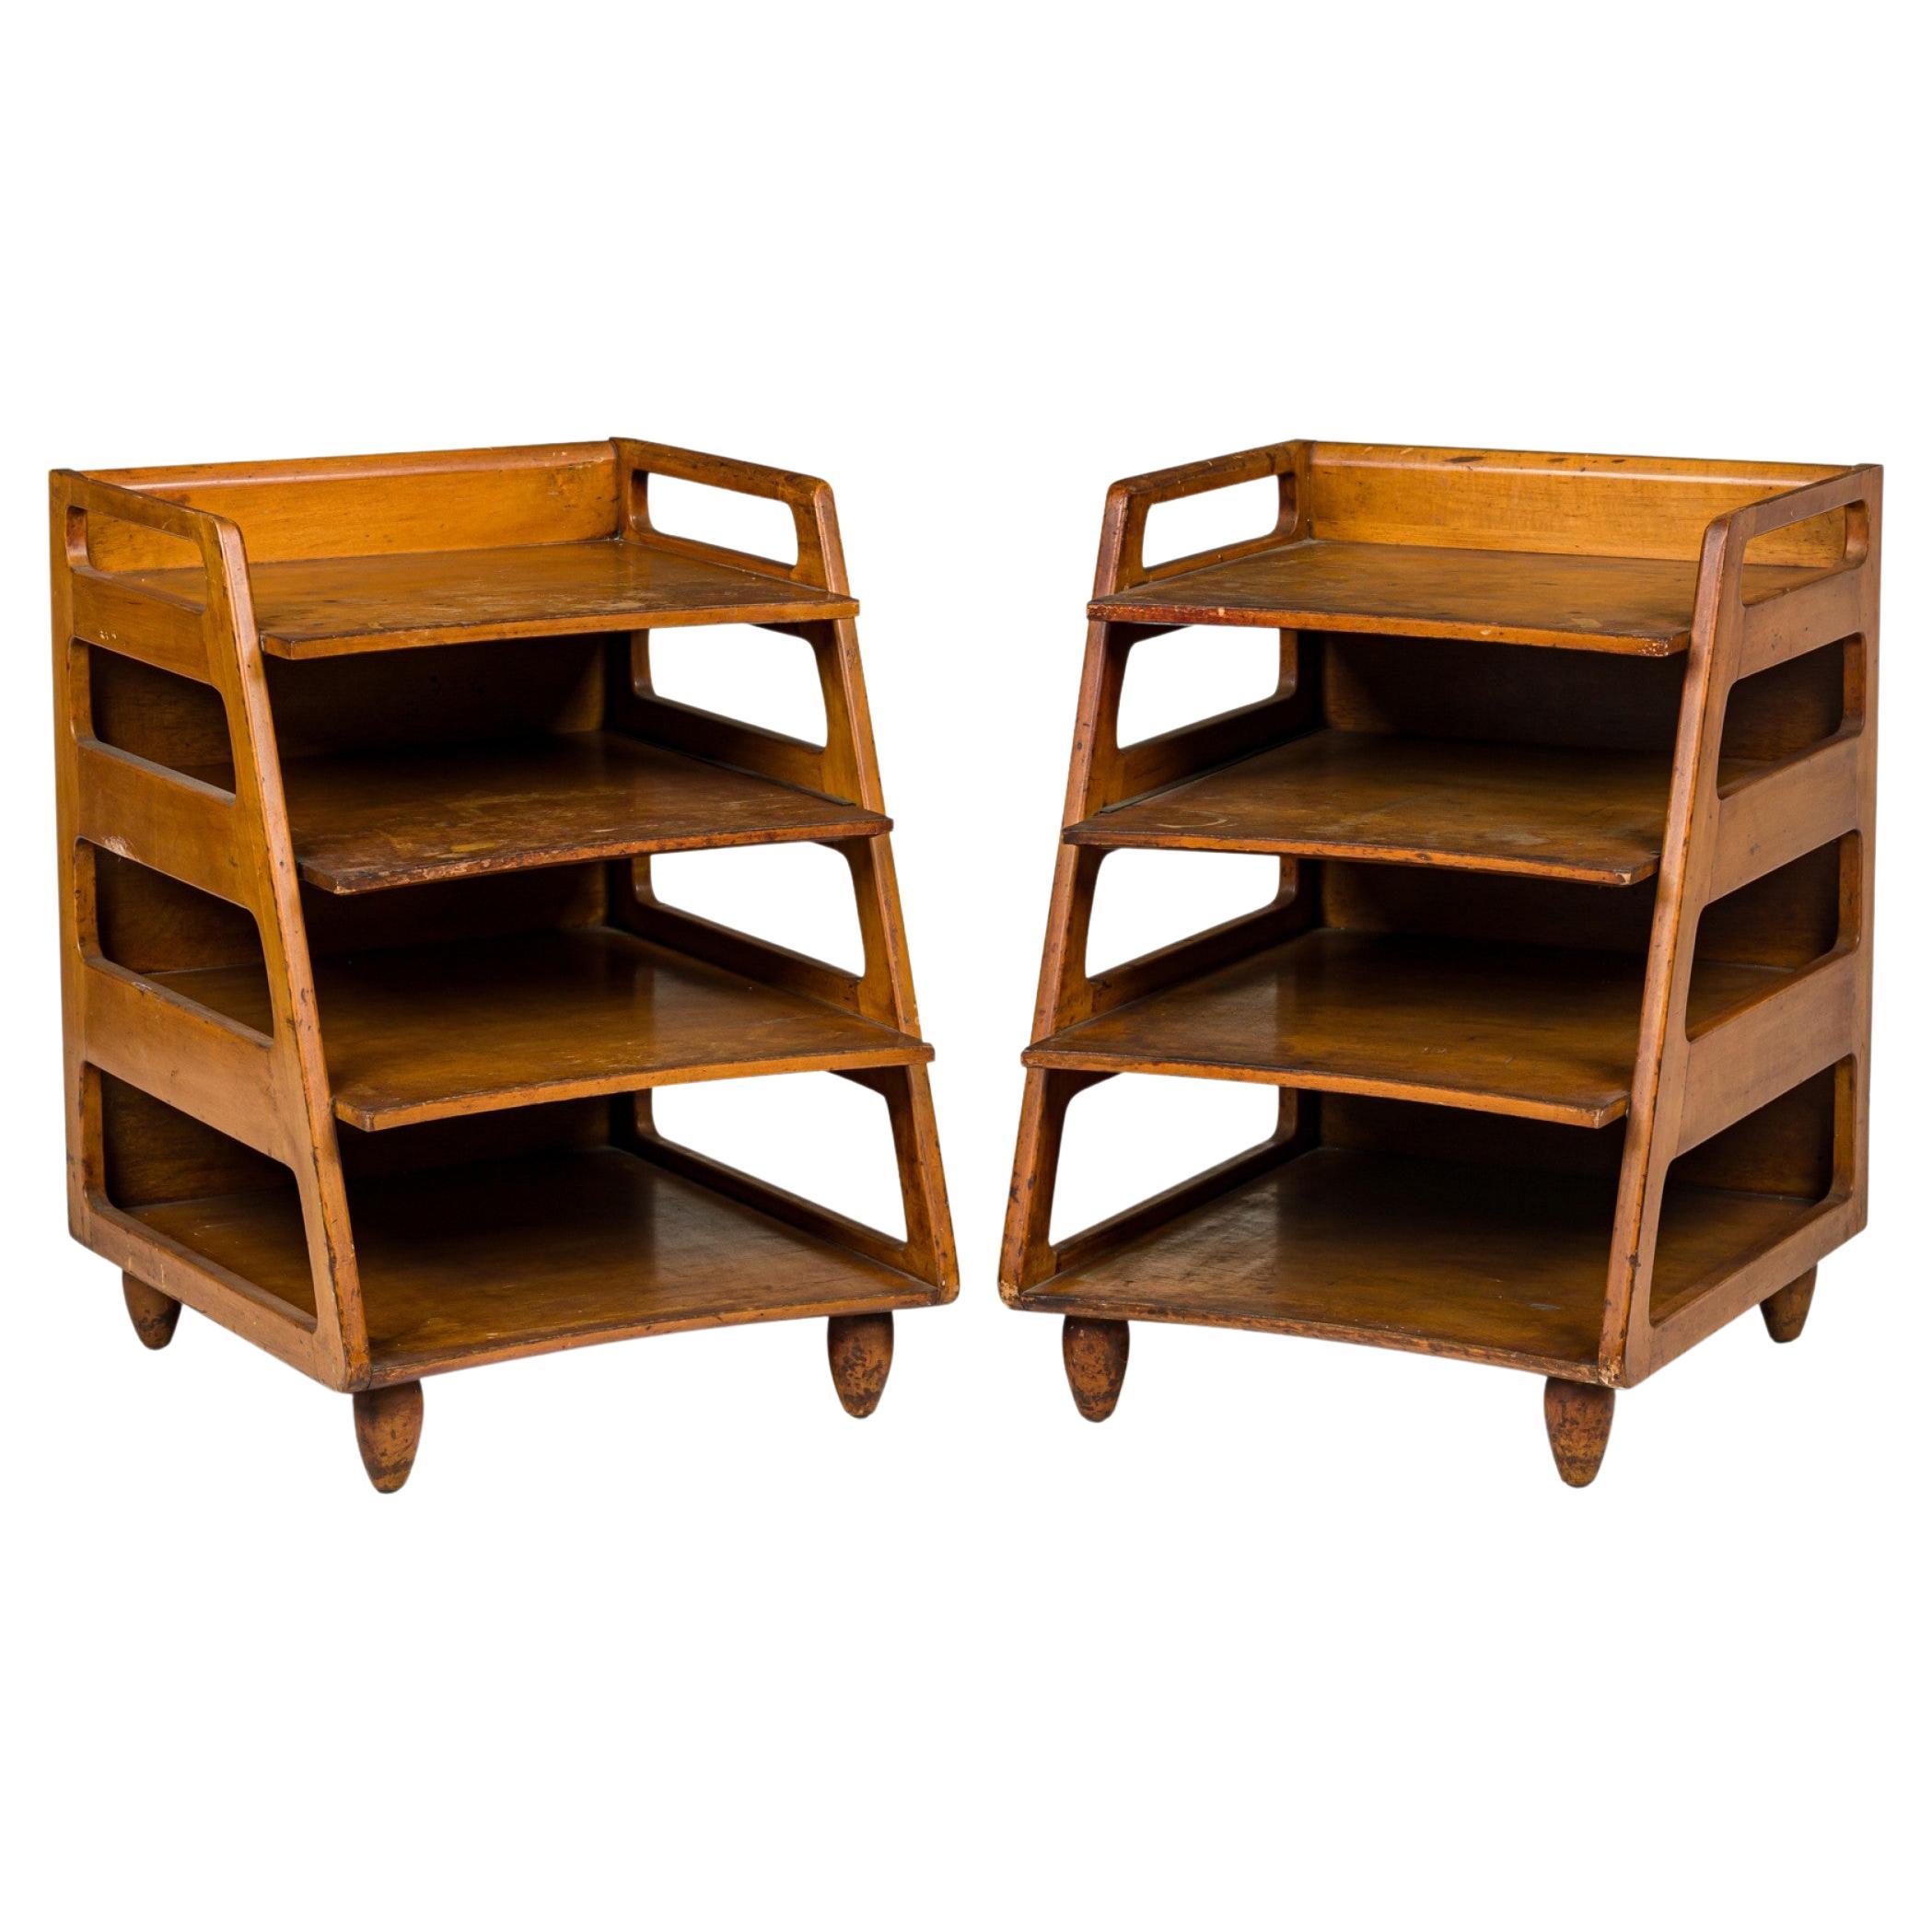 Pair of Kittinger American Mid-Century Wooden Four-Compartment Magazine Tables